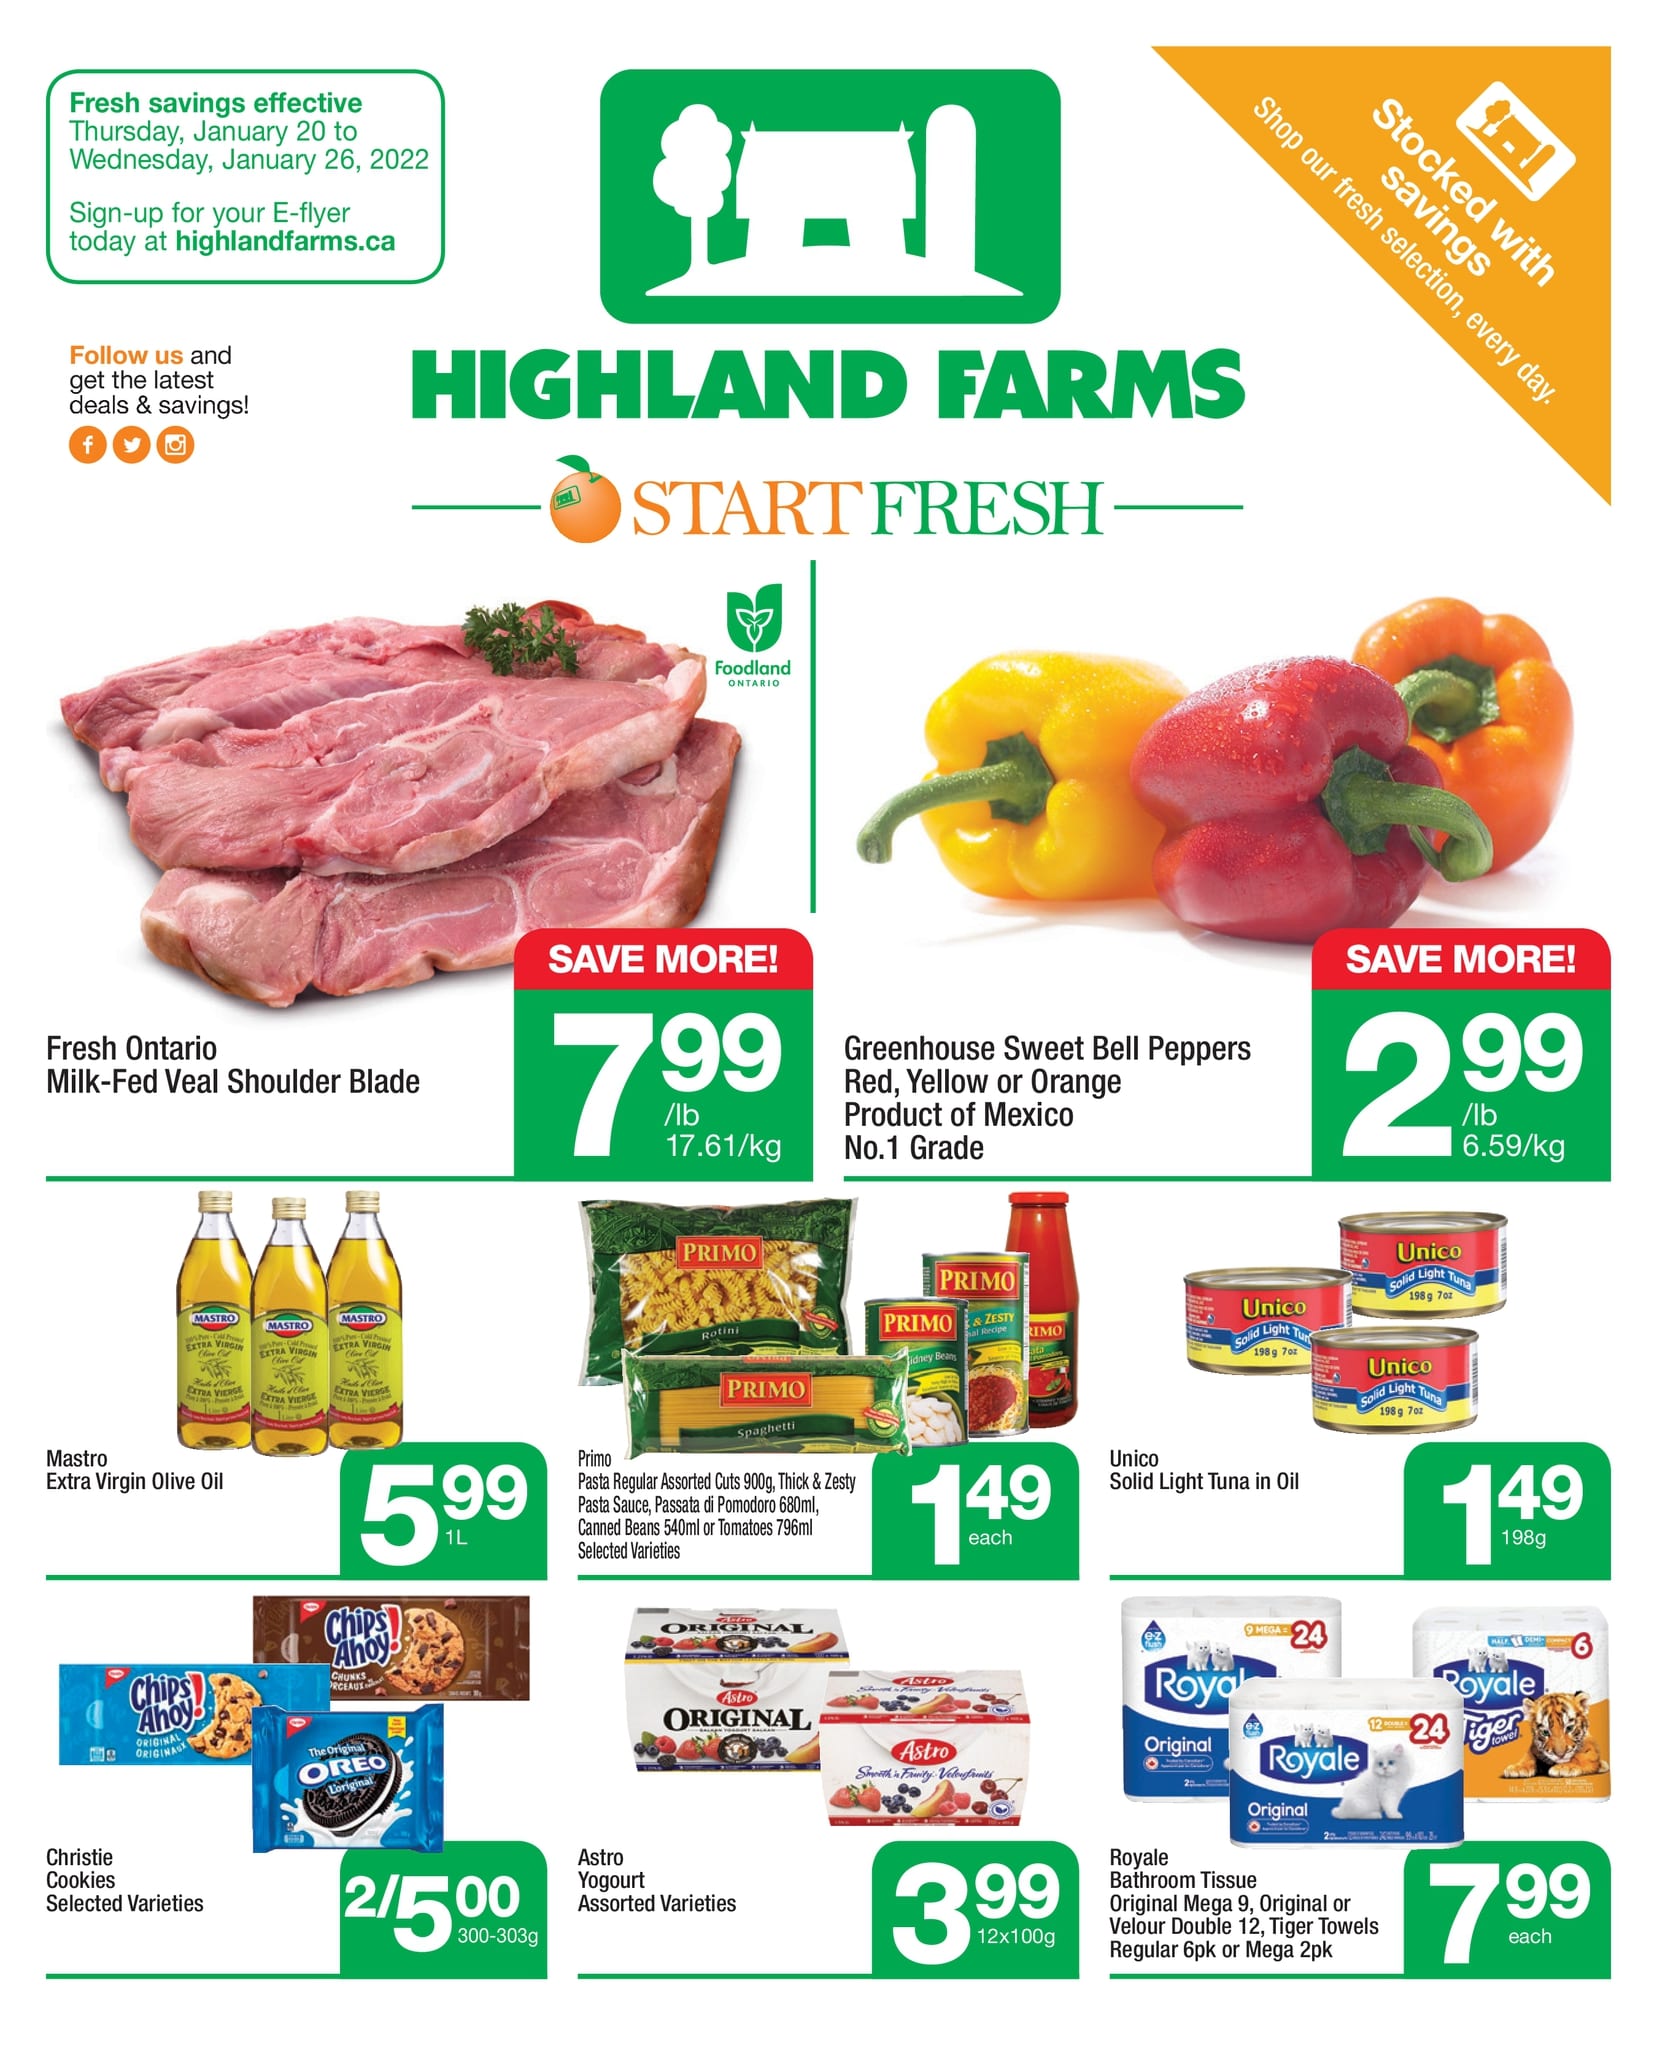 Highland Farms - Weekly Flyer Specials